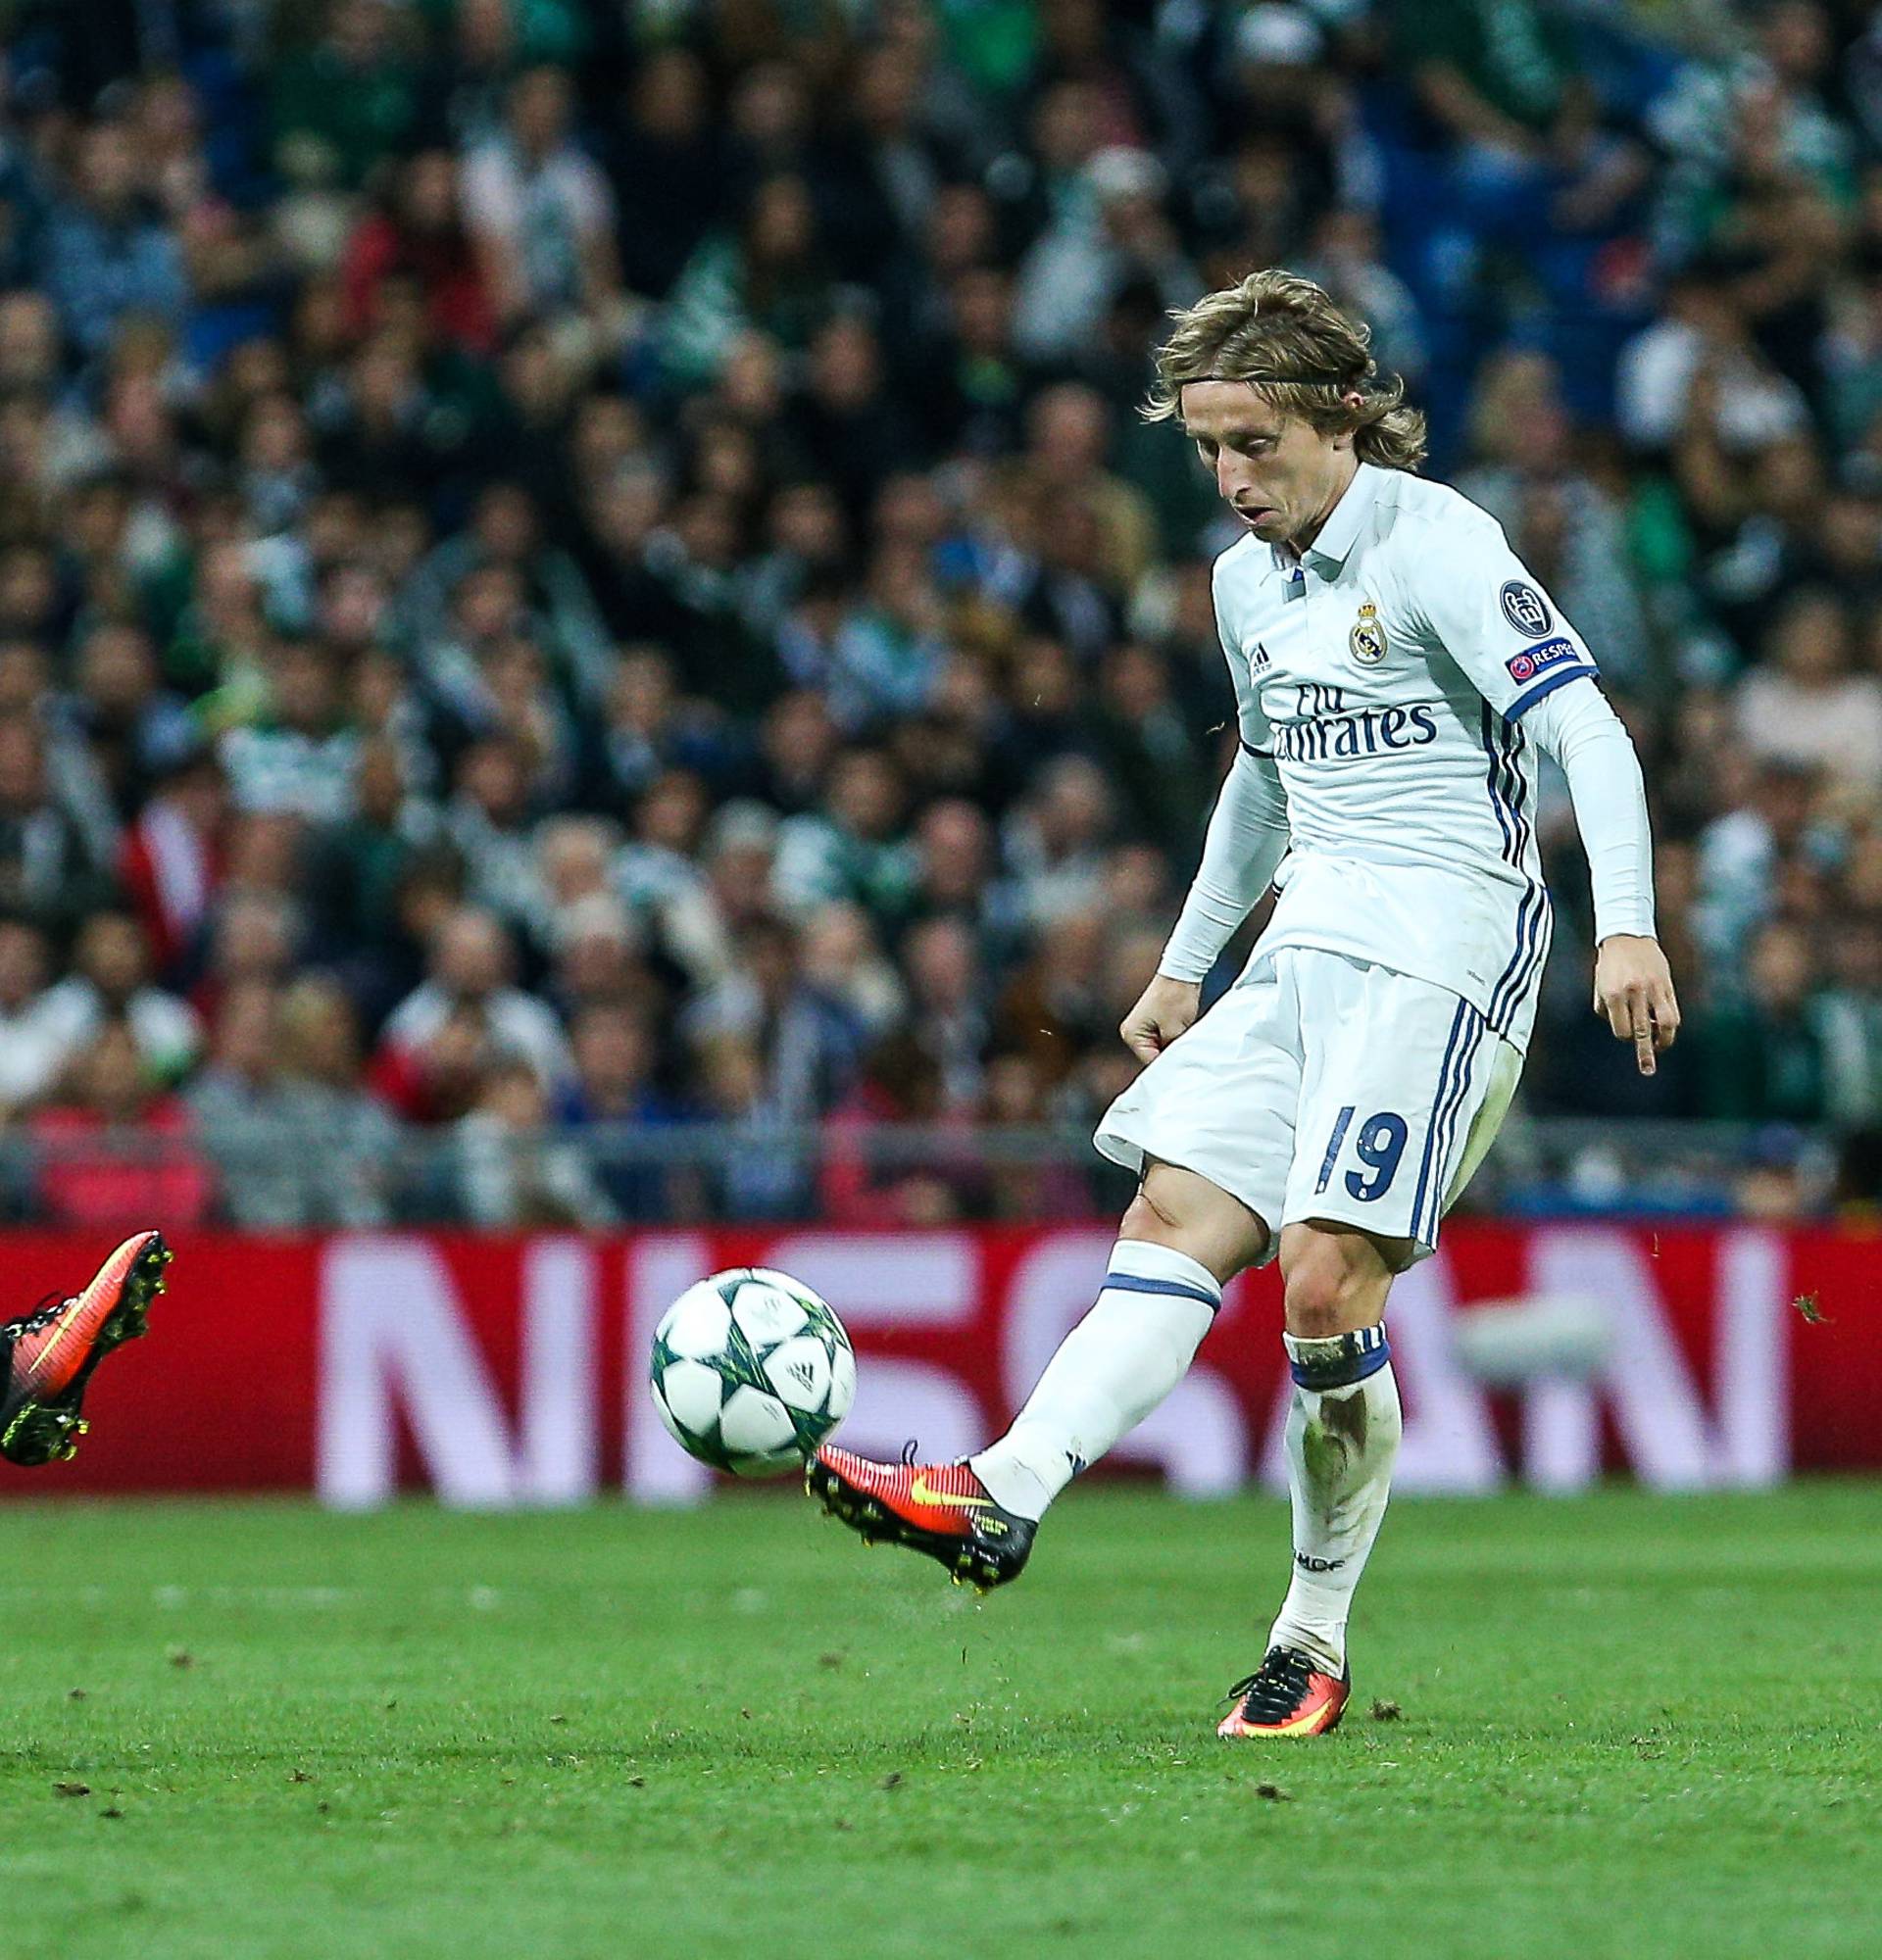 Champions League match between Real Madrid an Sporting Clube de Portugal